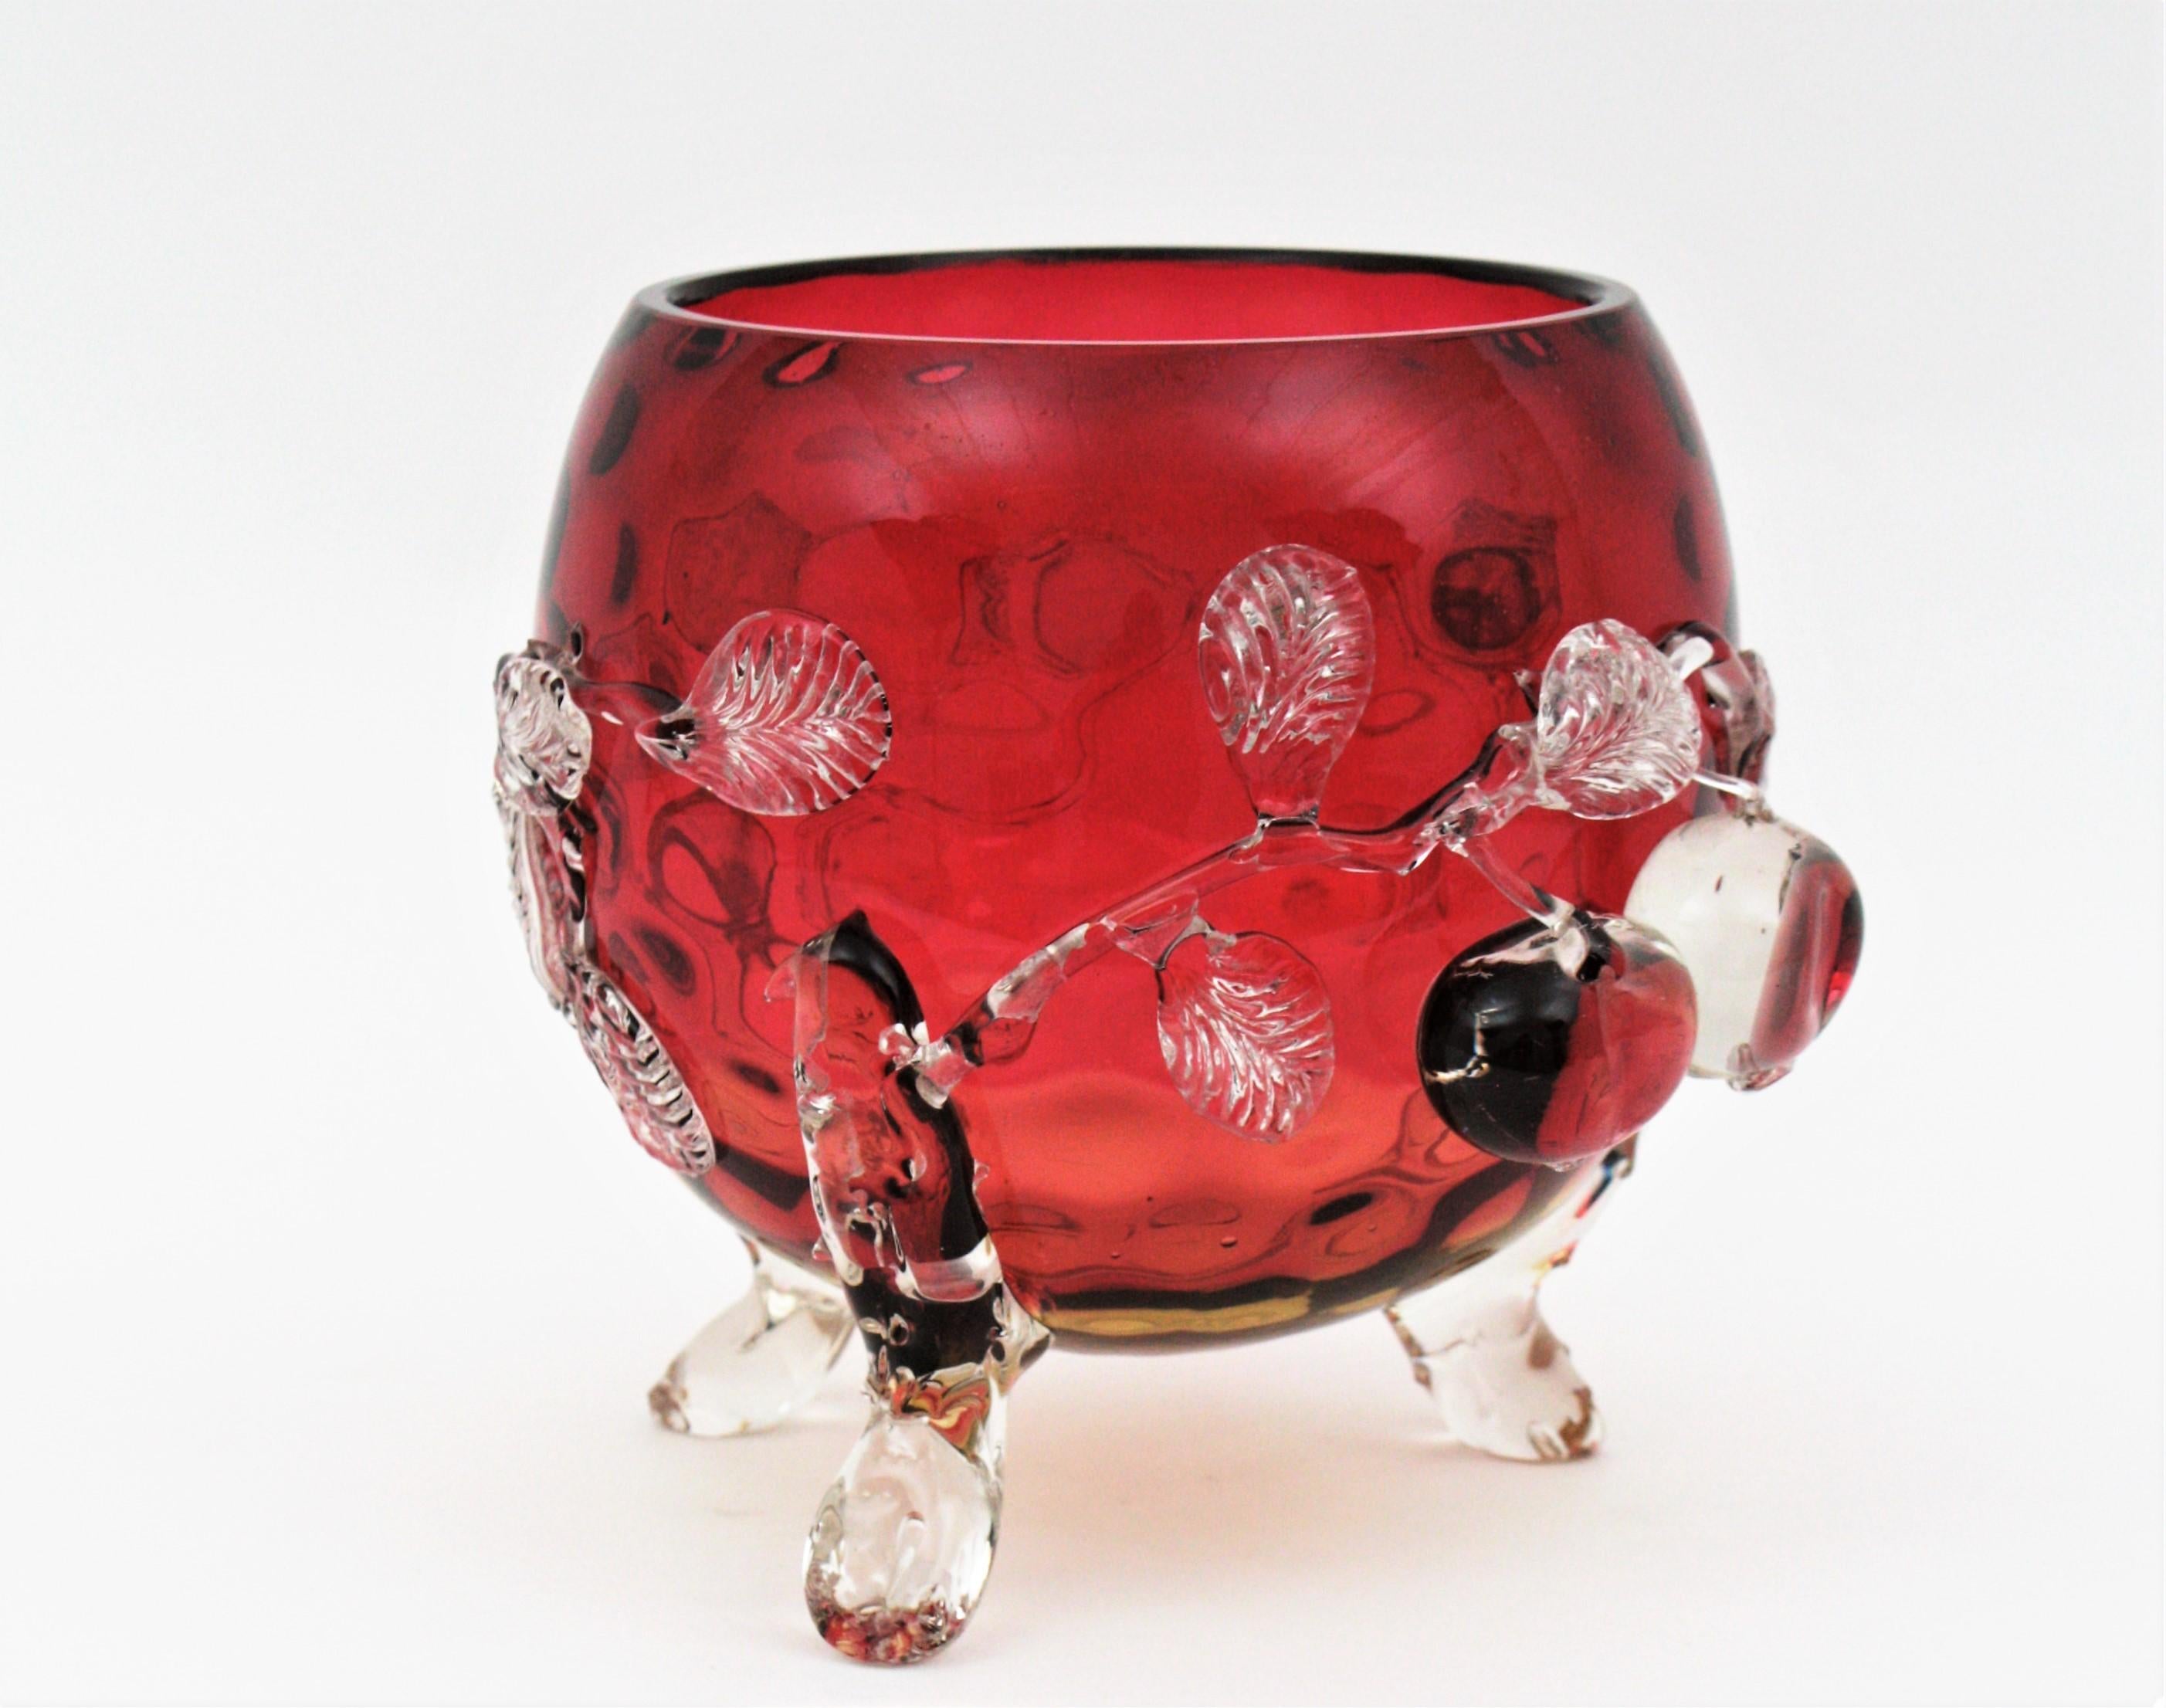 Spectacular Victorian hand blown Amberina glass coin dot pattern footed bowl centerpiece / vase with applied cherry decorations.
Optic coin dot pattern thorough all the surface.
Applied clear glass cherry and leaves motifs.
Gorgeous placed as a